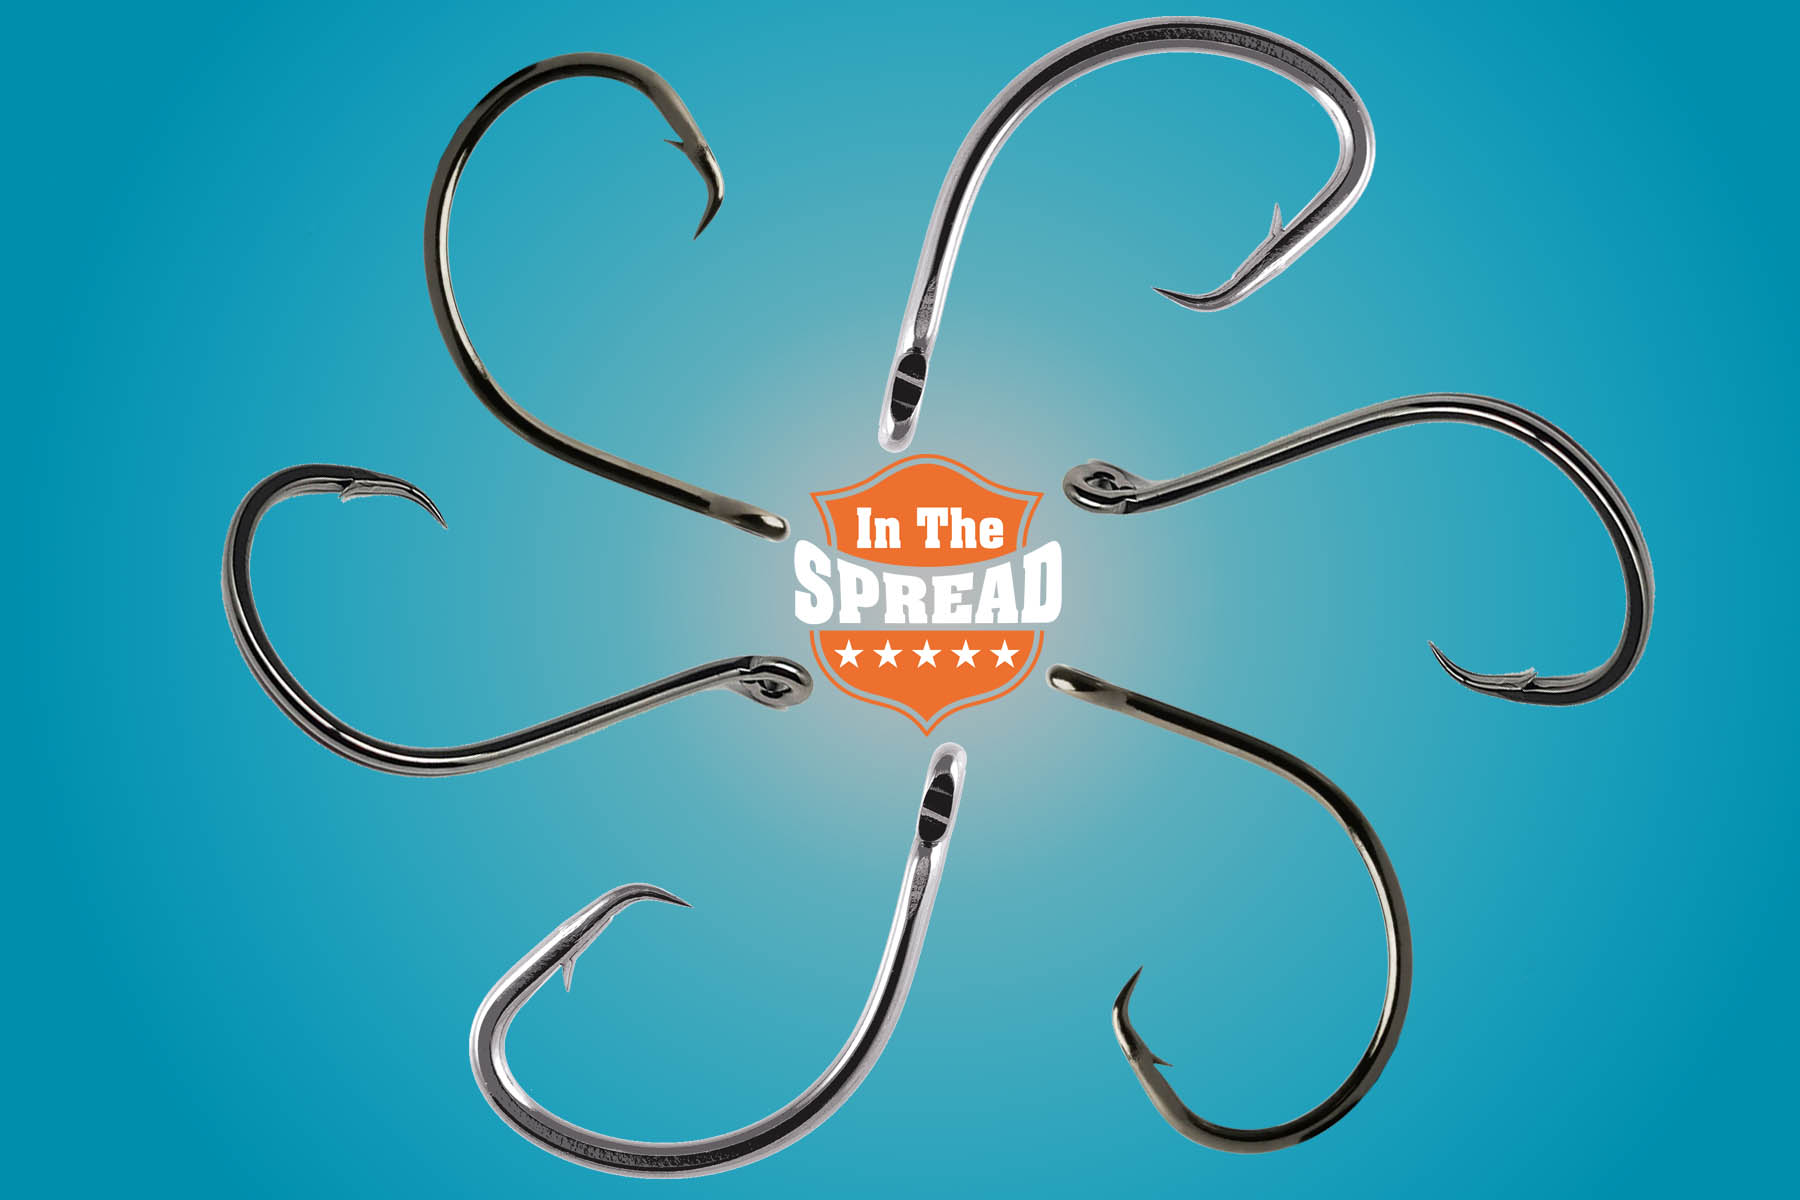 What Are The BEST Sea Fishing Hooks? 